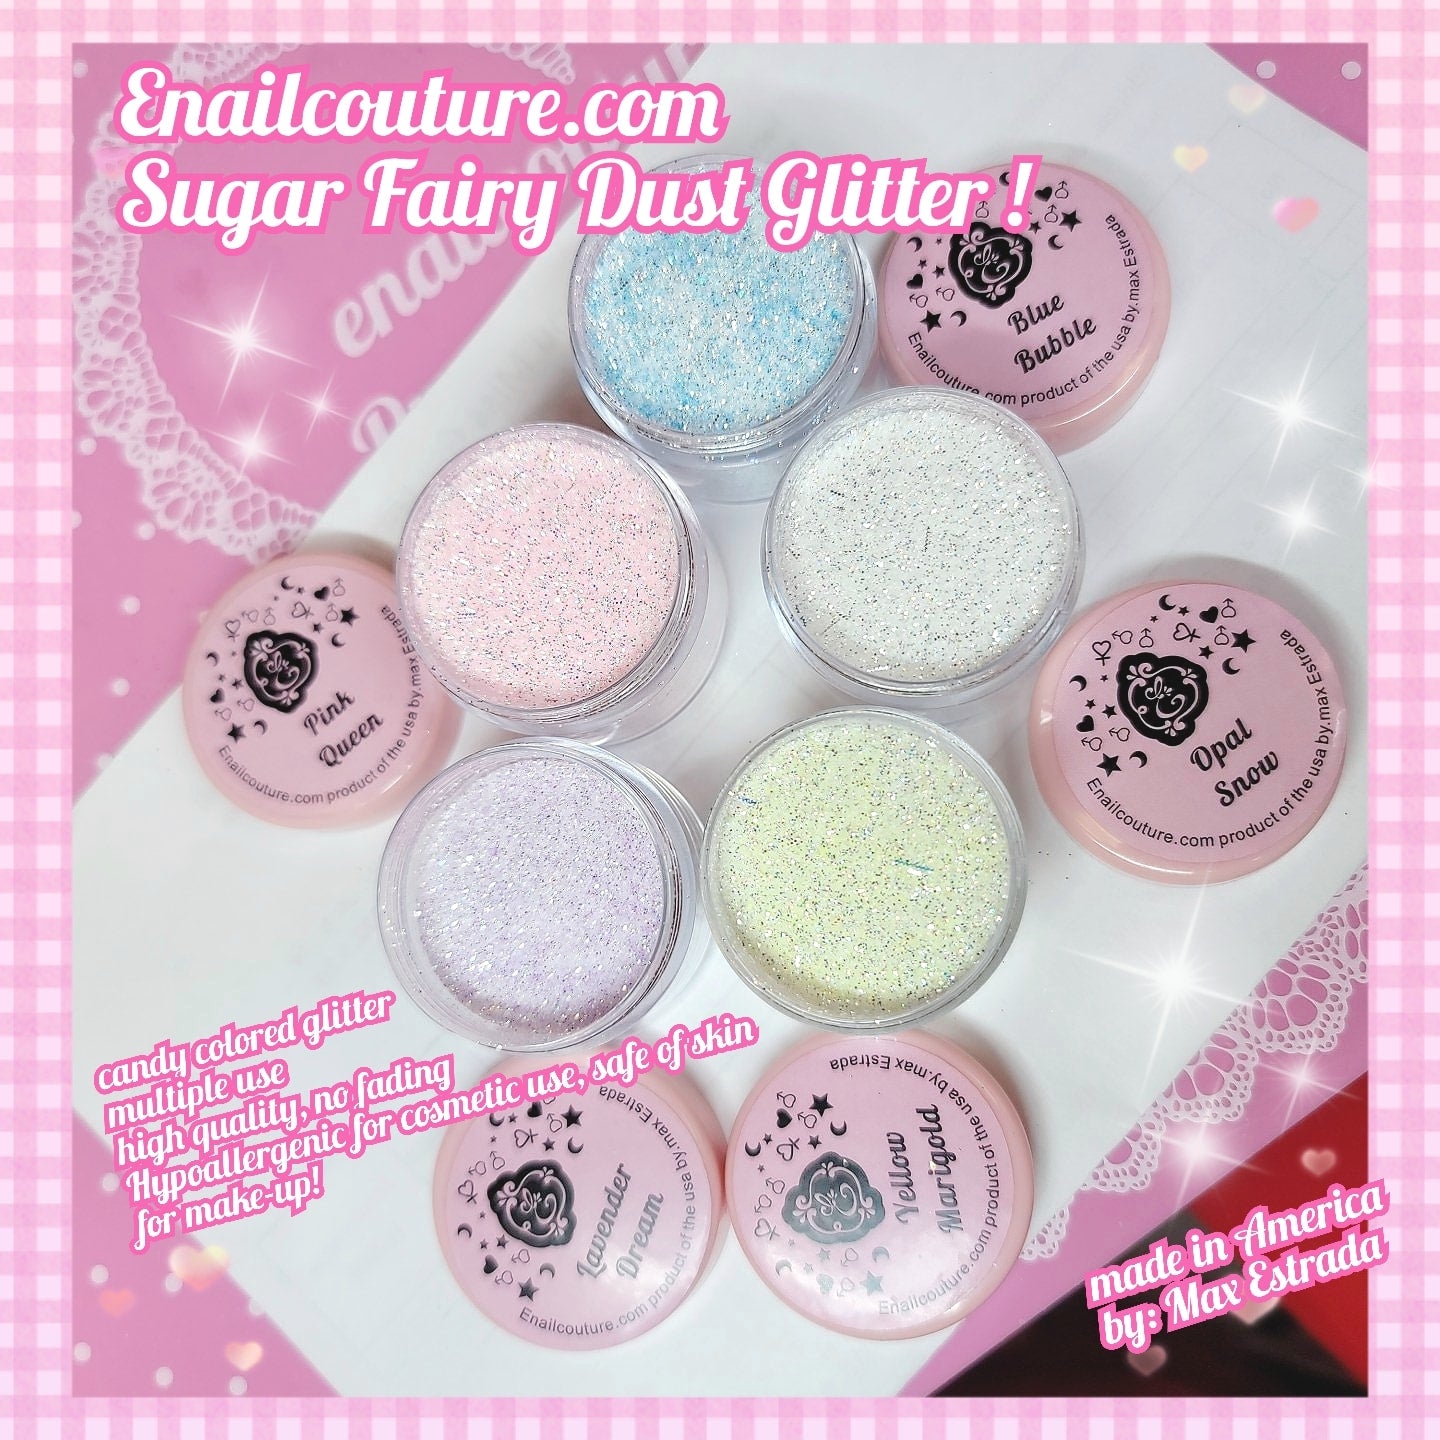 Fairy Dust Holographic Glitter Sequins for Nail Art Nail Dip